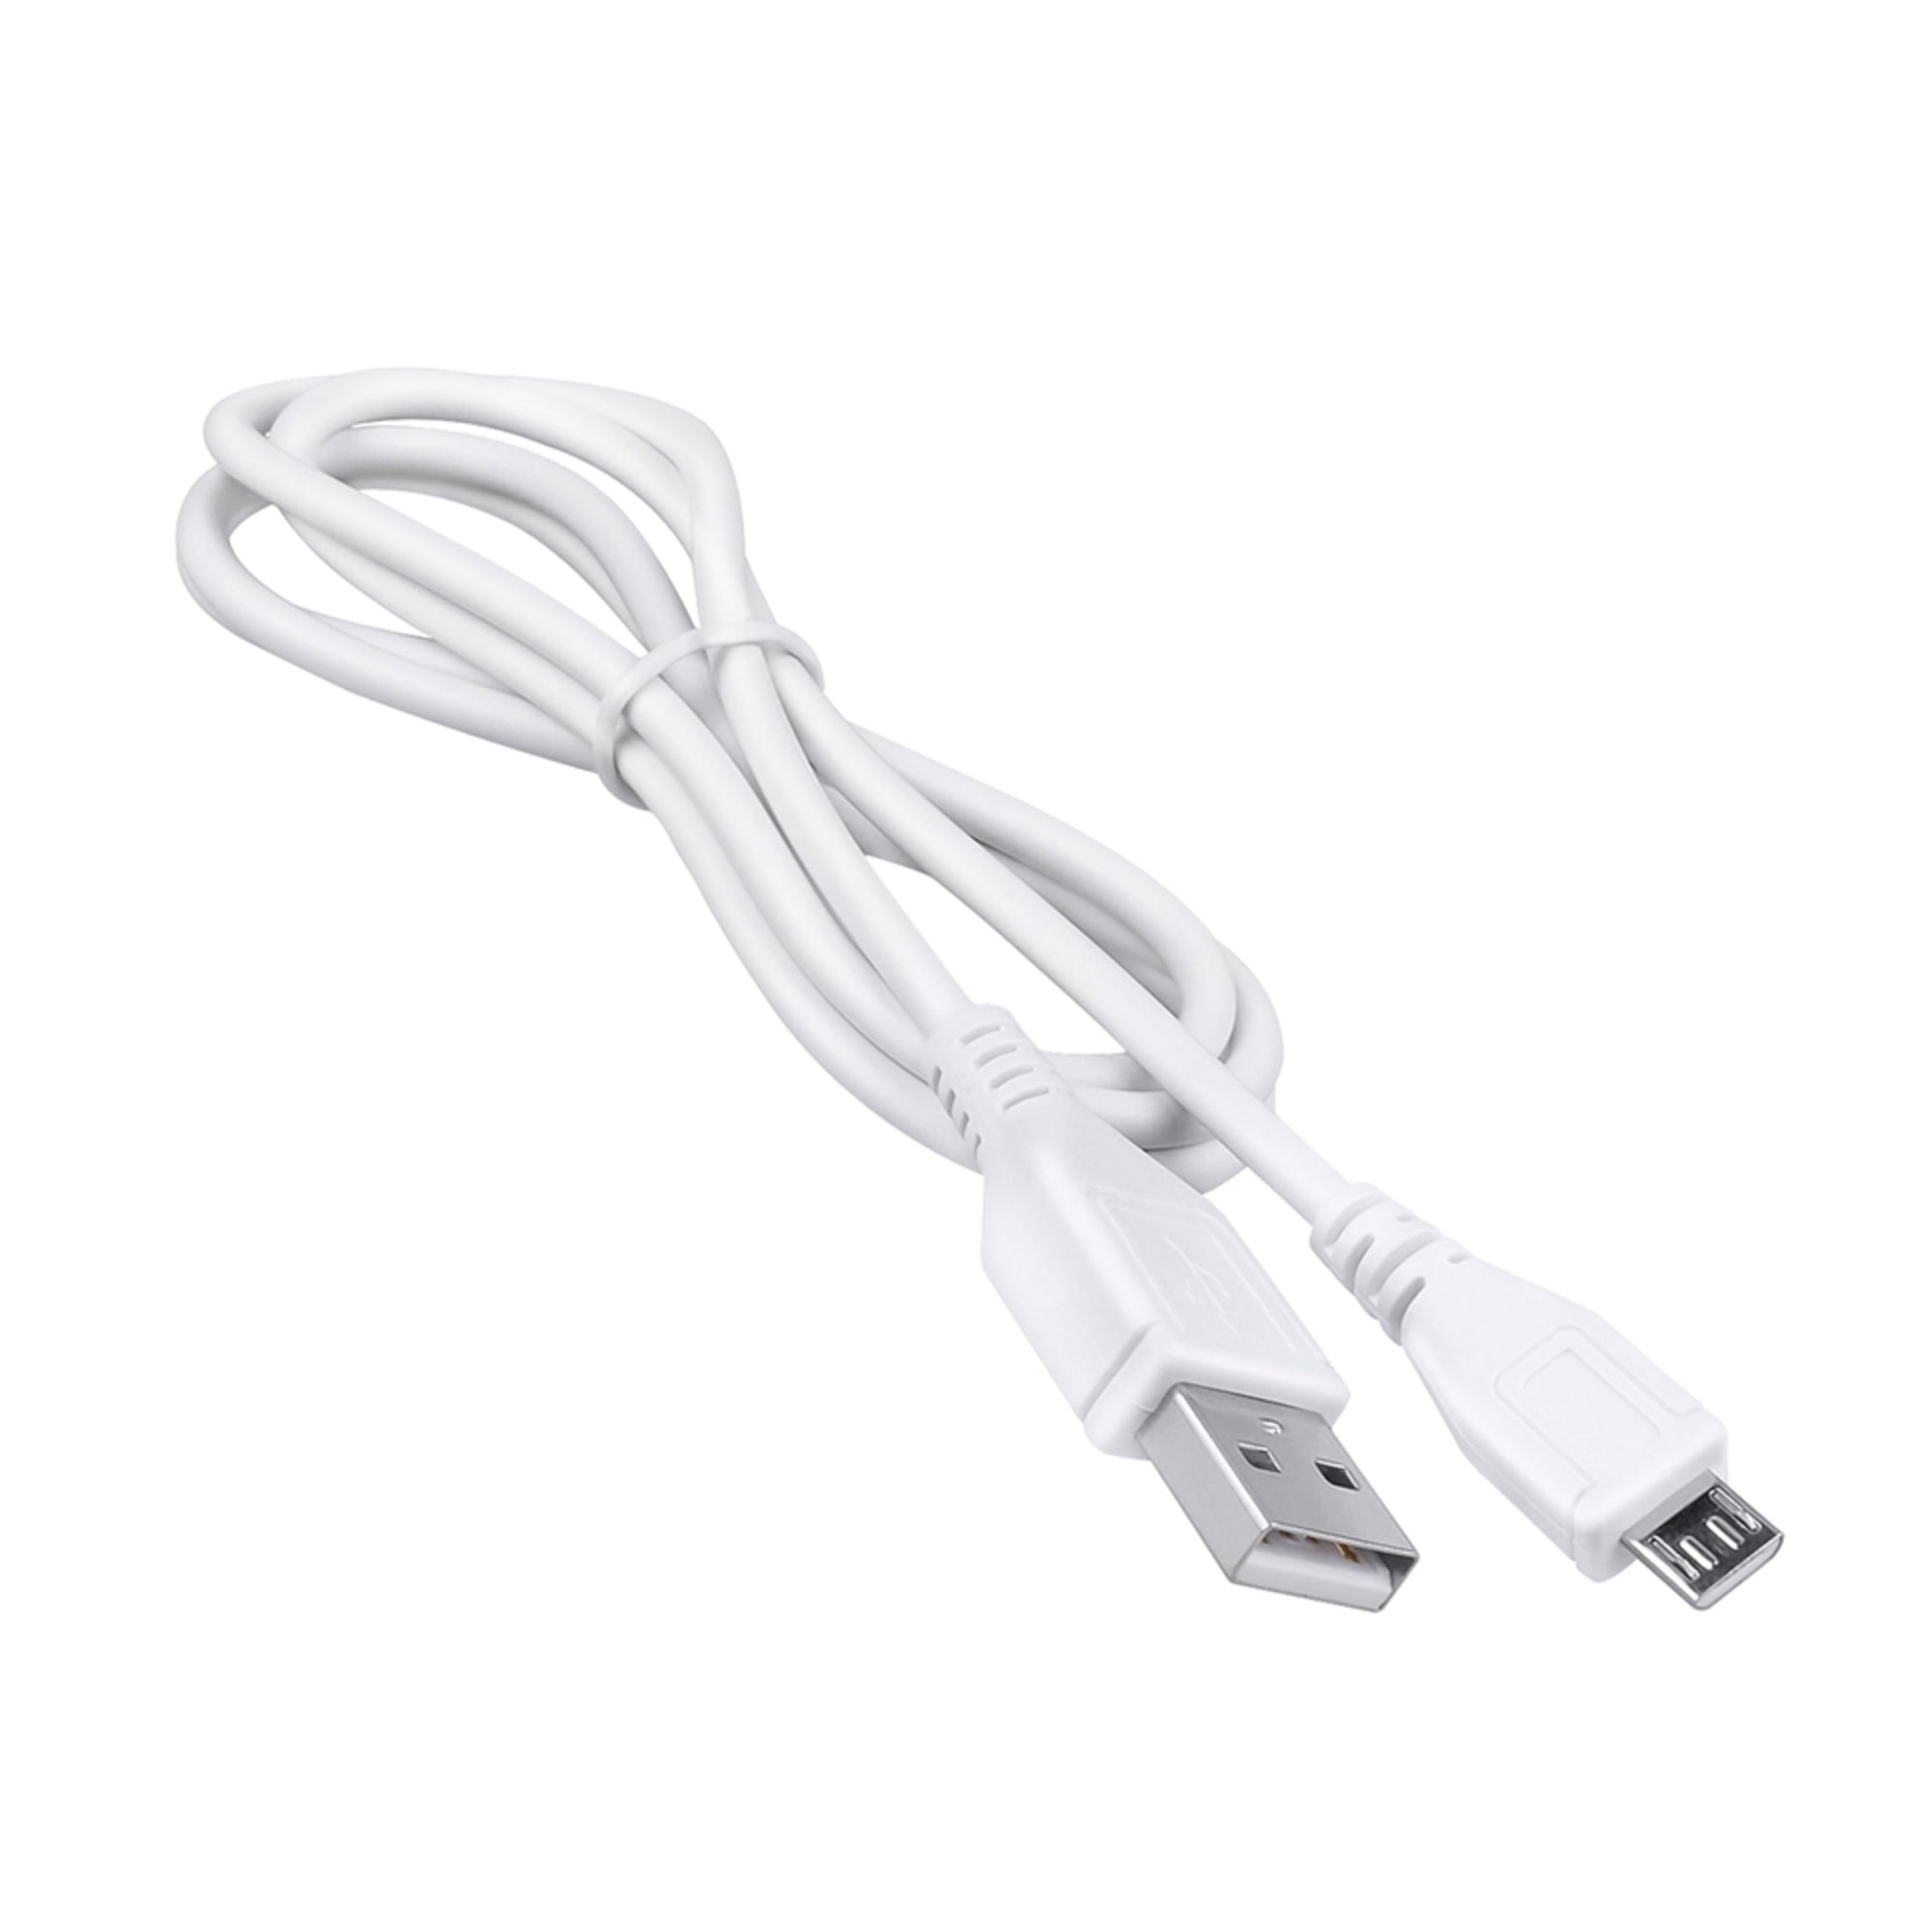 Insignia™ 6' USB to Mini-B Charge-and-Sync Printer Cable Black NS-PC2AMU6 -  Best Buy